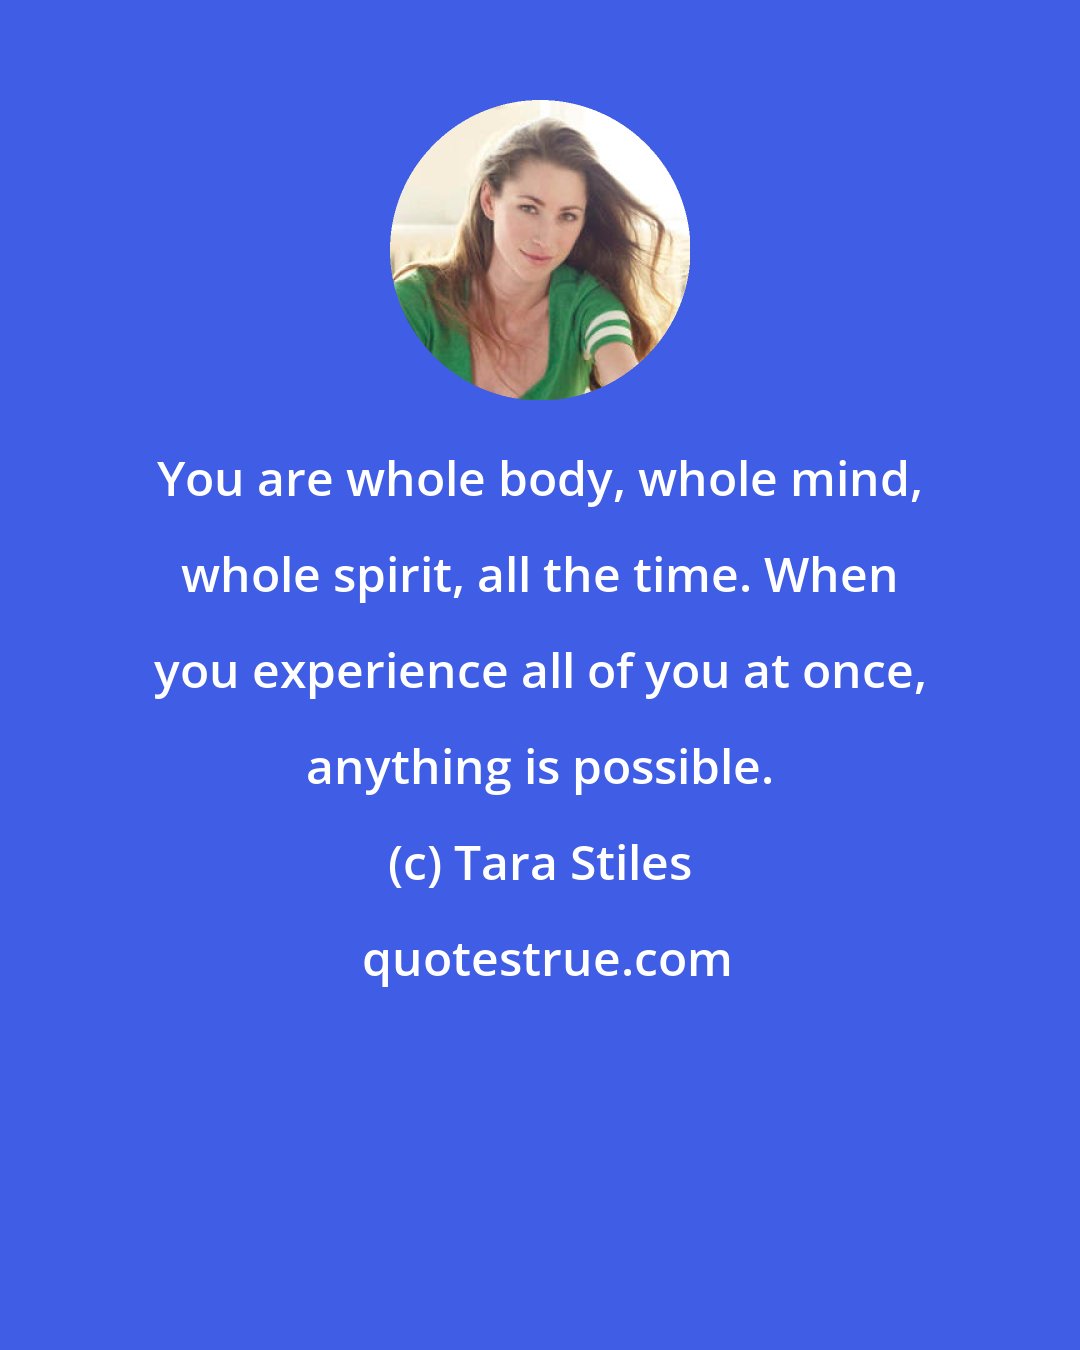 Tara Stiles: You are whole body, whole mind, whole spirit, all the time. When you experience all of you at once, anything is possible.